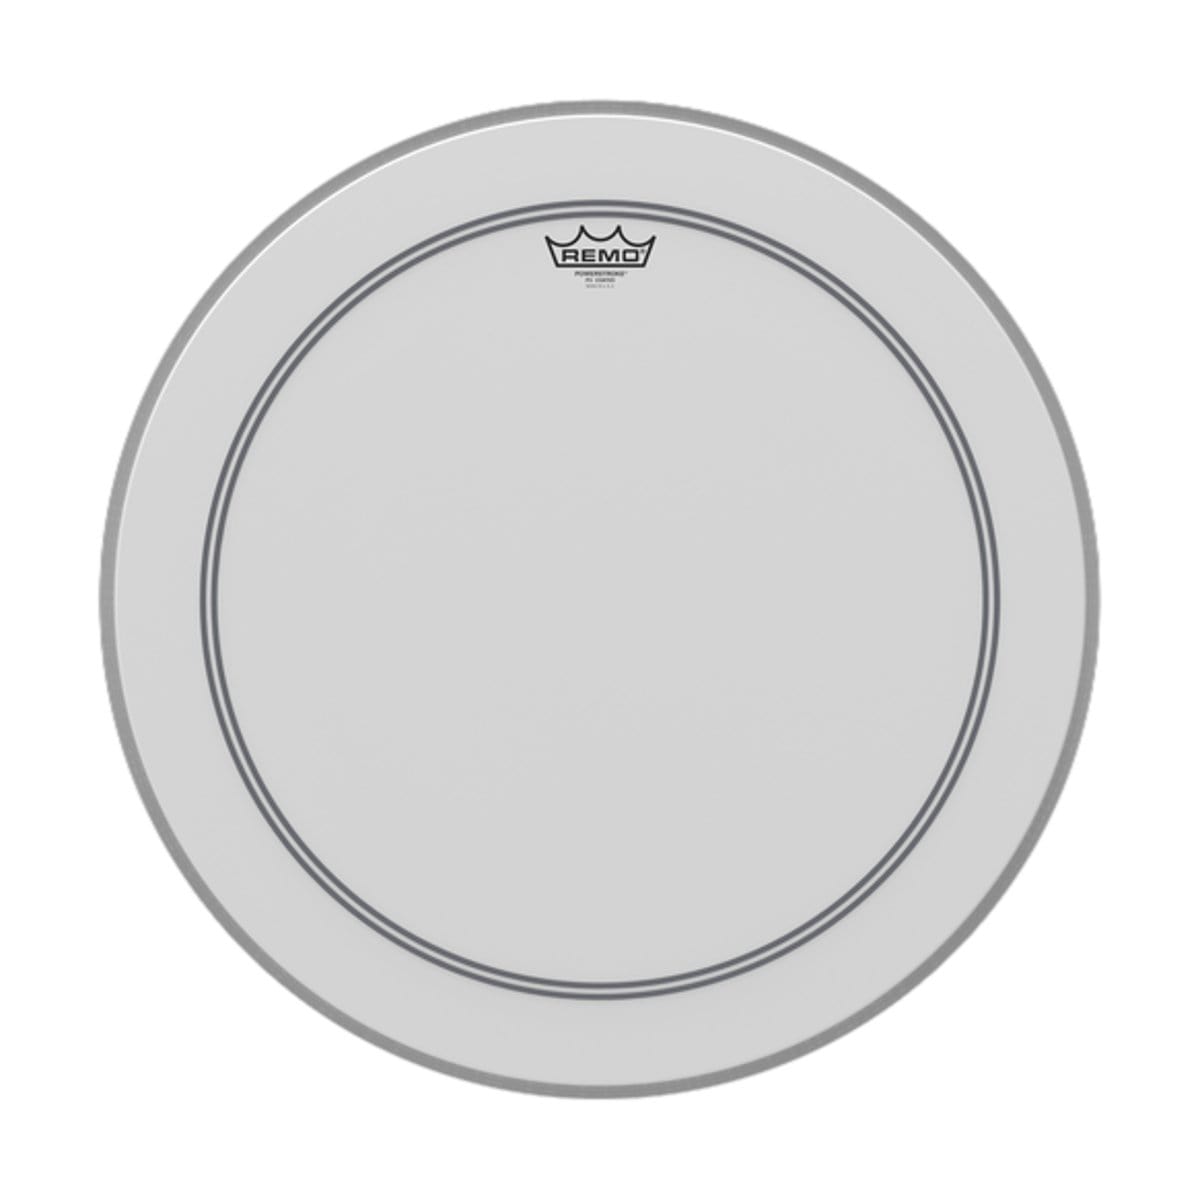 Remo Percussion Remo 22 Inch Bass Drum Head Powerstroke P3 Coated P3-1122-C2 - Byron Music